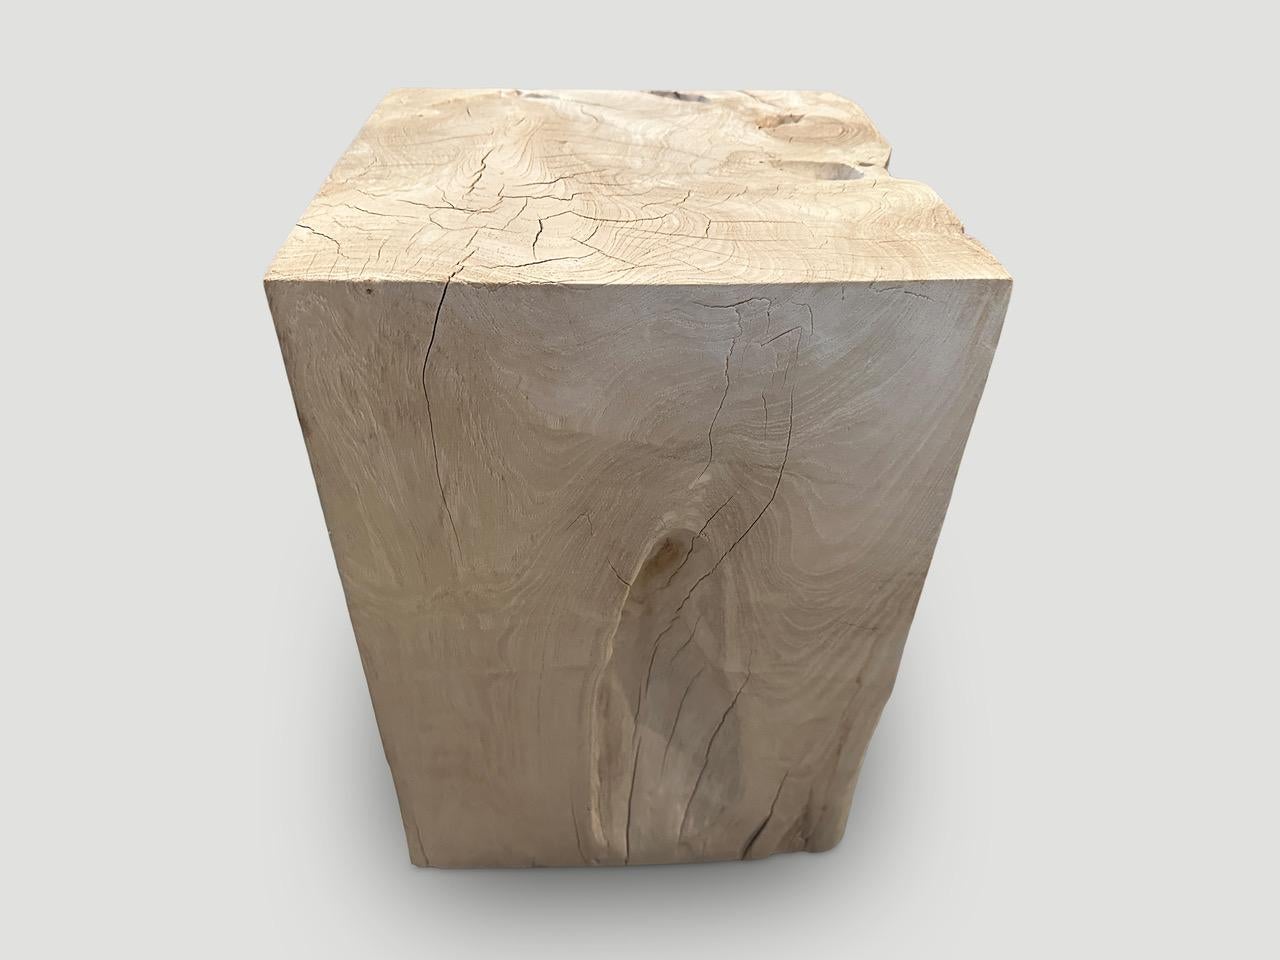 Reclaimed teak wood side table, hand carved whilst respecting the natural organic wood. Bleached to a bone finish. We have a collection. The images reflect the one shown. 

The St. Barts Collection features an exciting line of organic white wash,